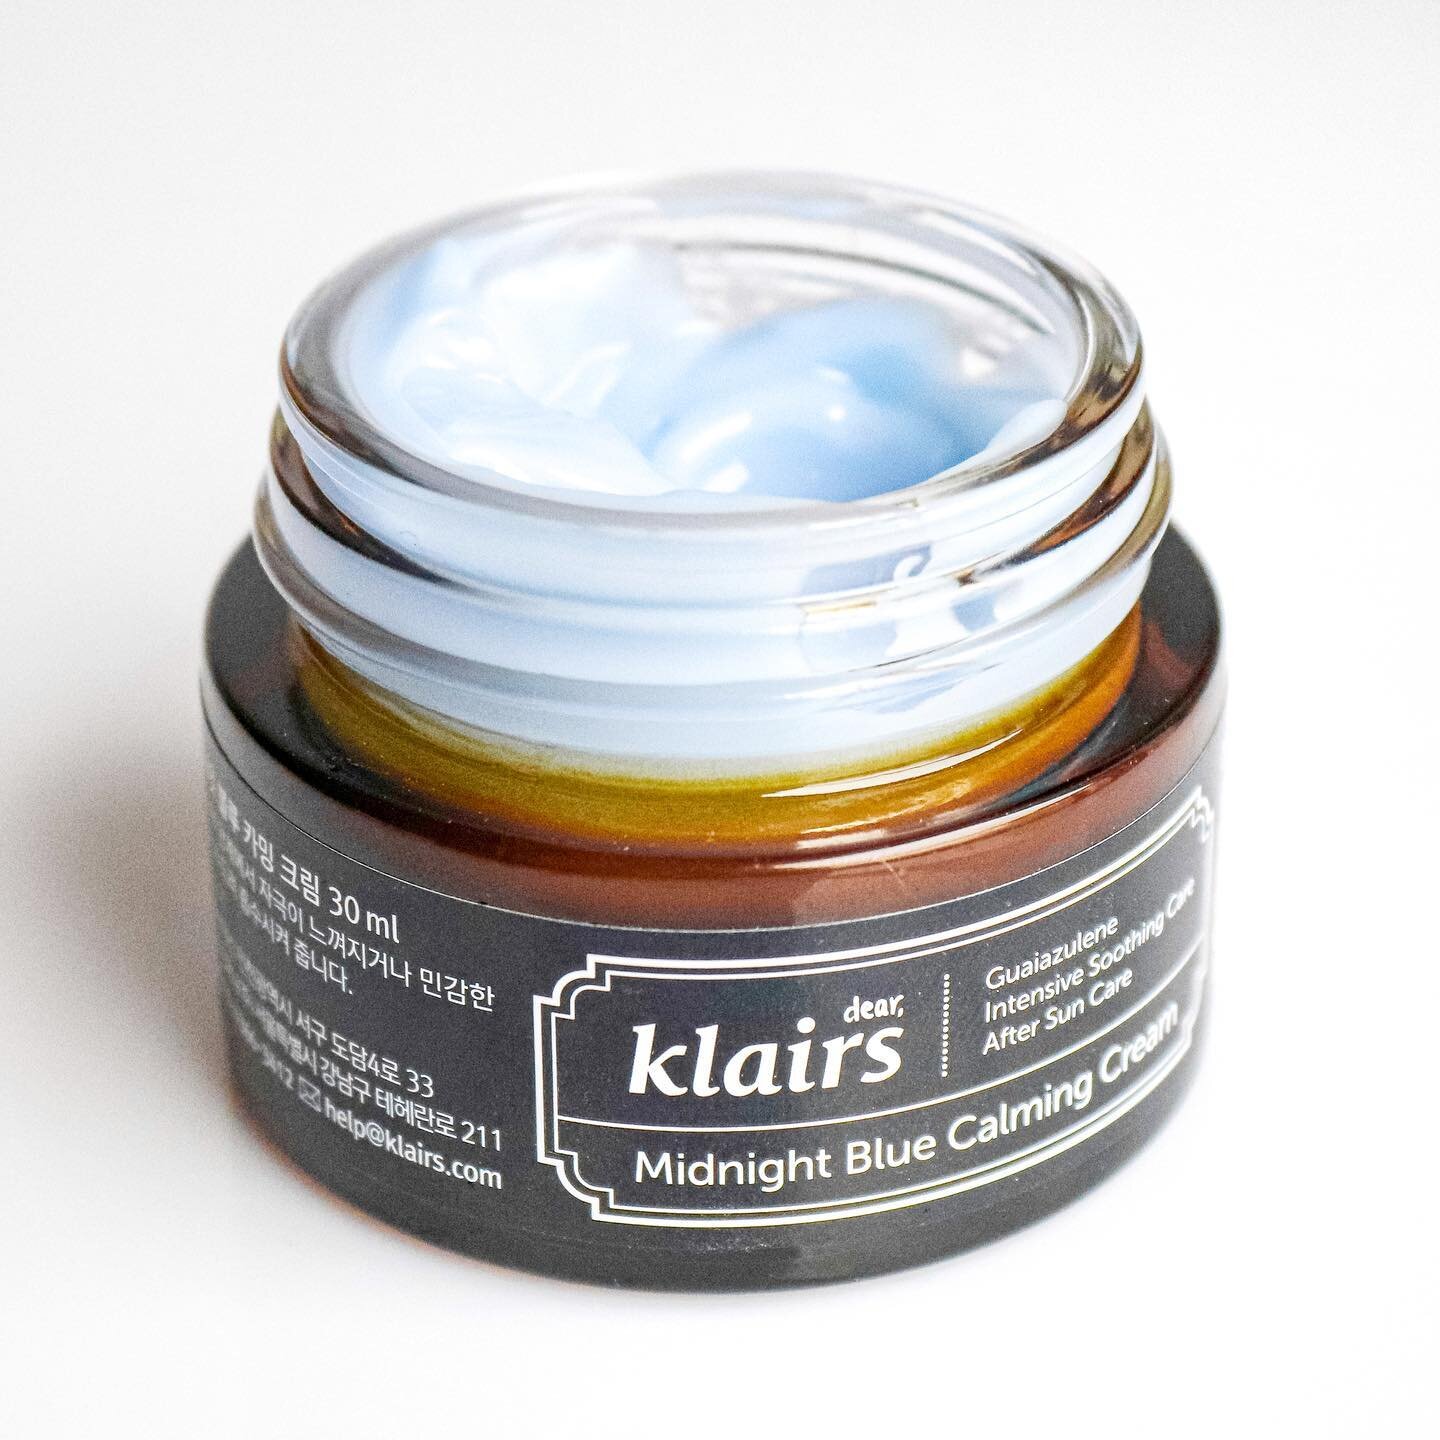 Which is the prettiest product you&rsquo;ve come across recently? //🦋
&mdash;&mdash;&mdash;
✨For me, it&rsquo;s definitely the @klairs.global Midnight Blue Calming Cream
✨Formulated with Guaiazulene, a soothing extract of chamomile that is responsib